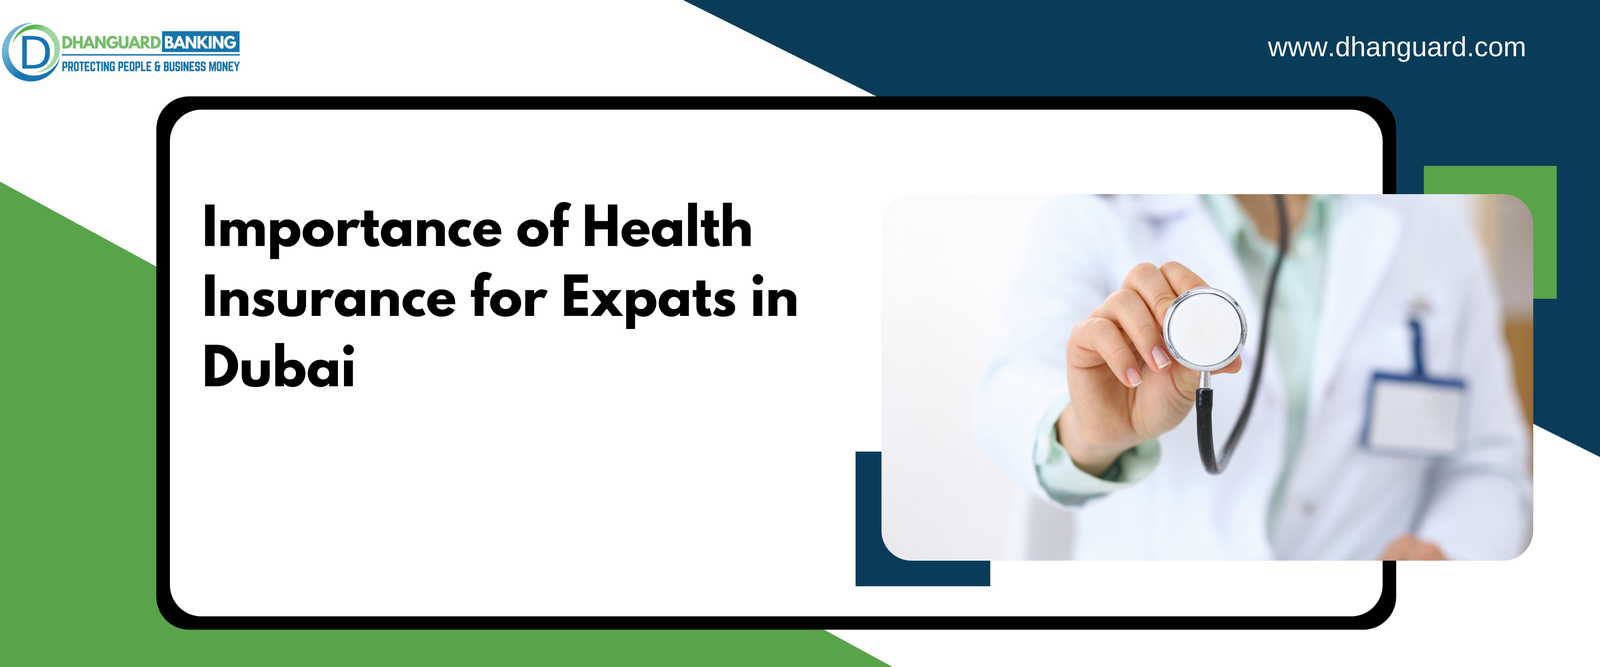 Importance of Health Insurance for Expats in Dubai | Dhanguard